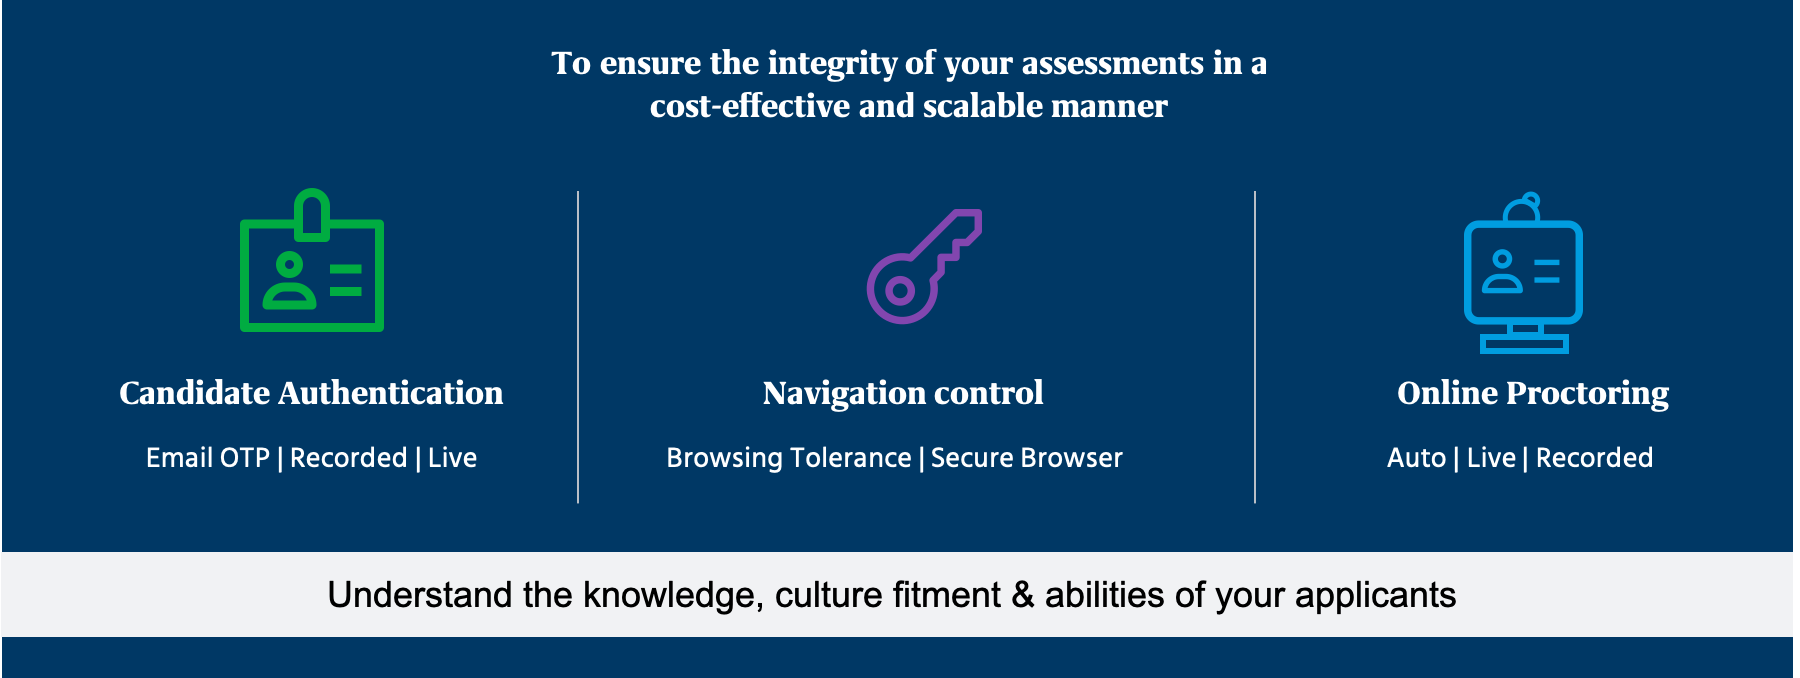 to_ensure_the_integrity_of_your_assessments_in_a_cost_effective_and_scalable_manner